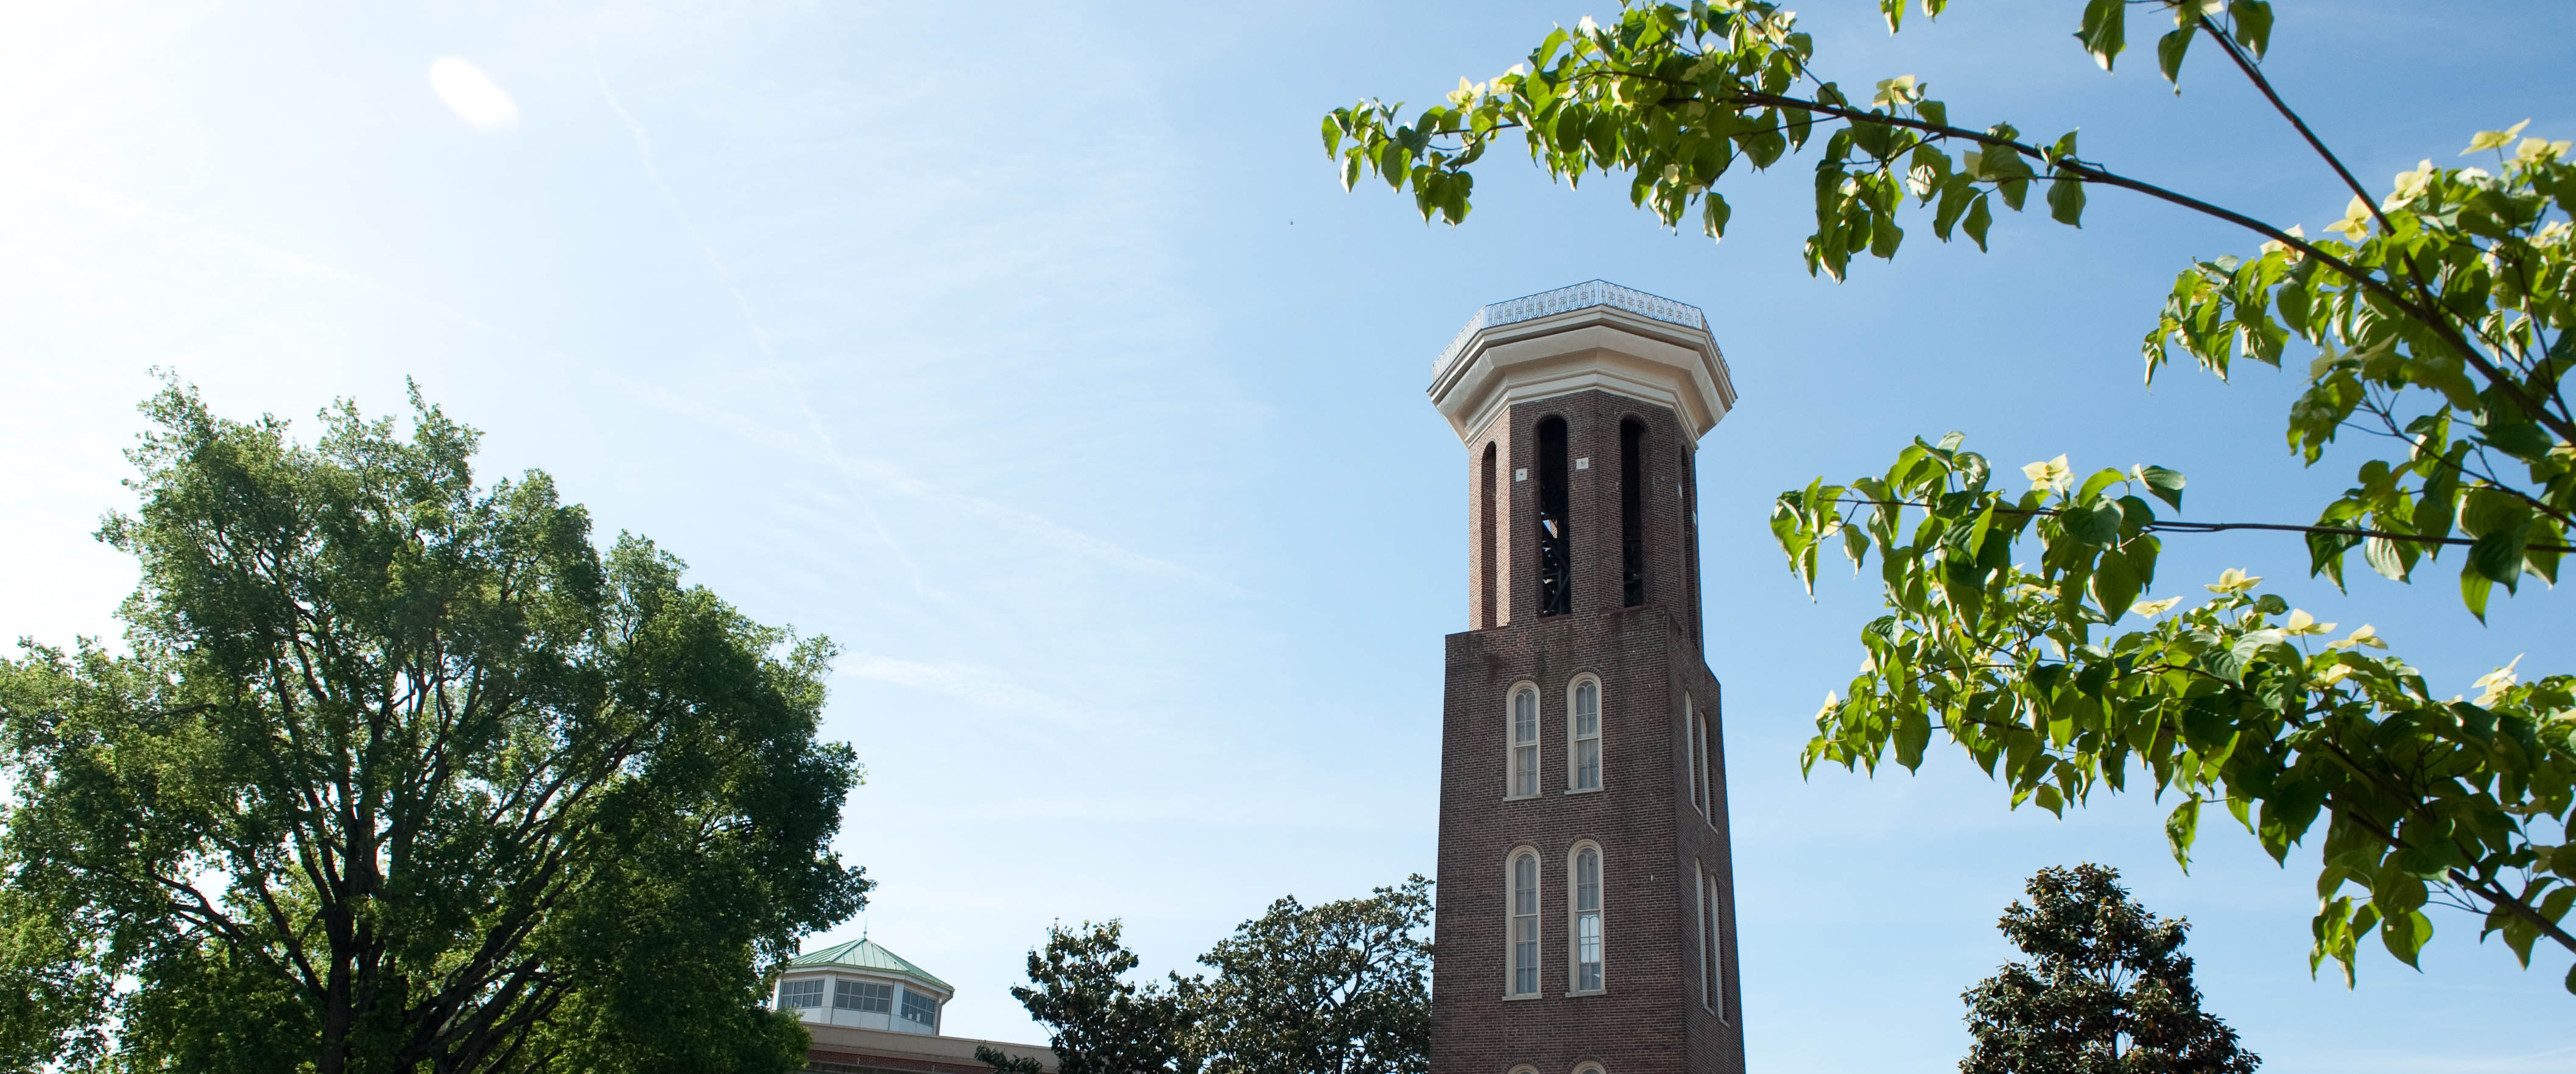 Belmont Bell tower on a sunny day